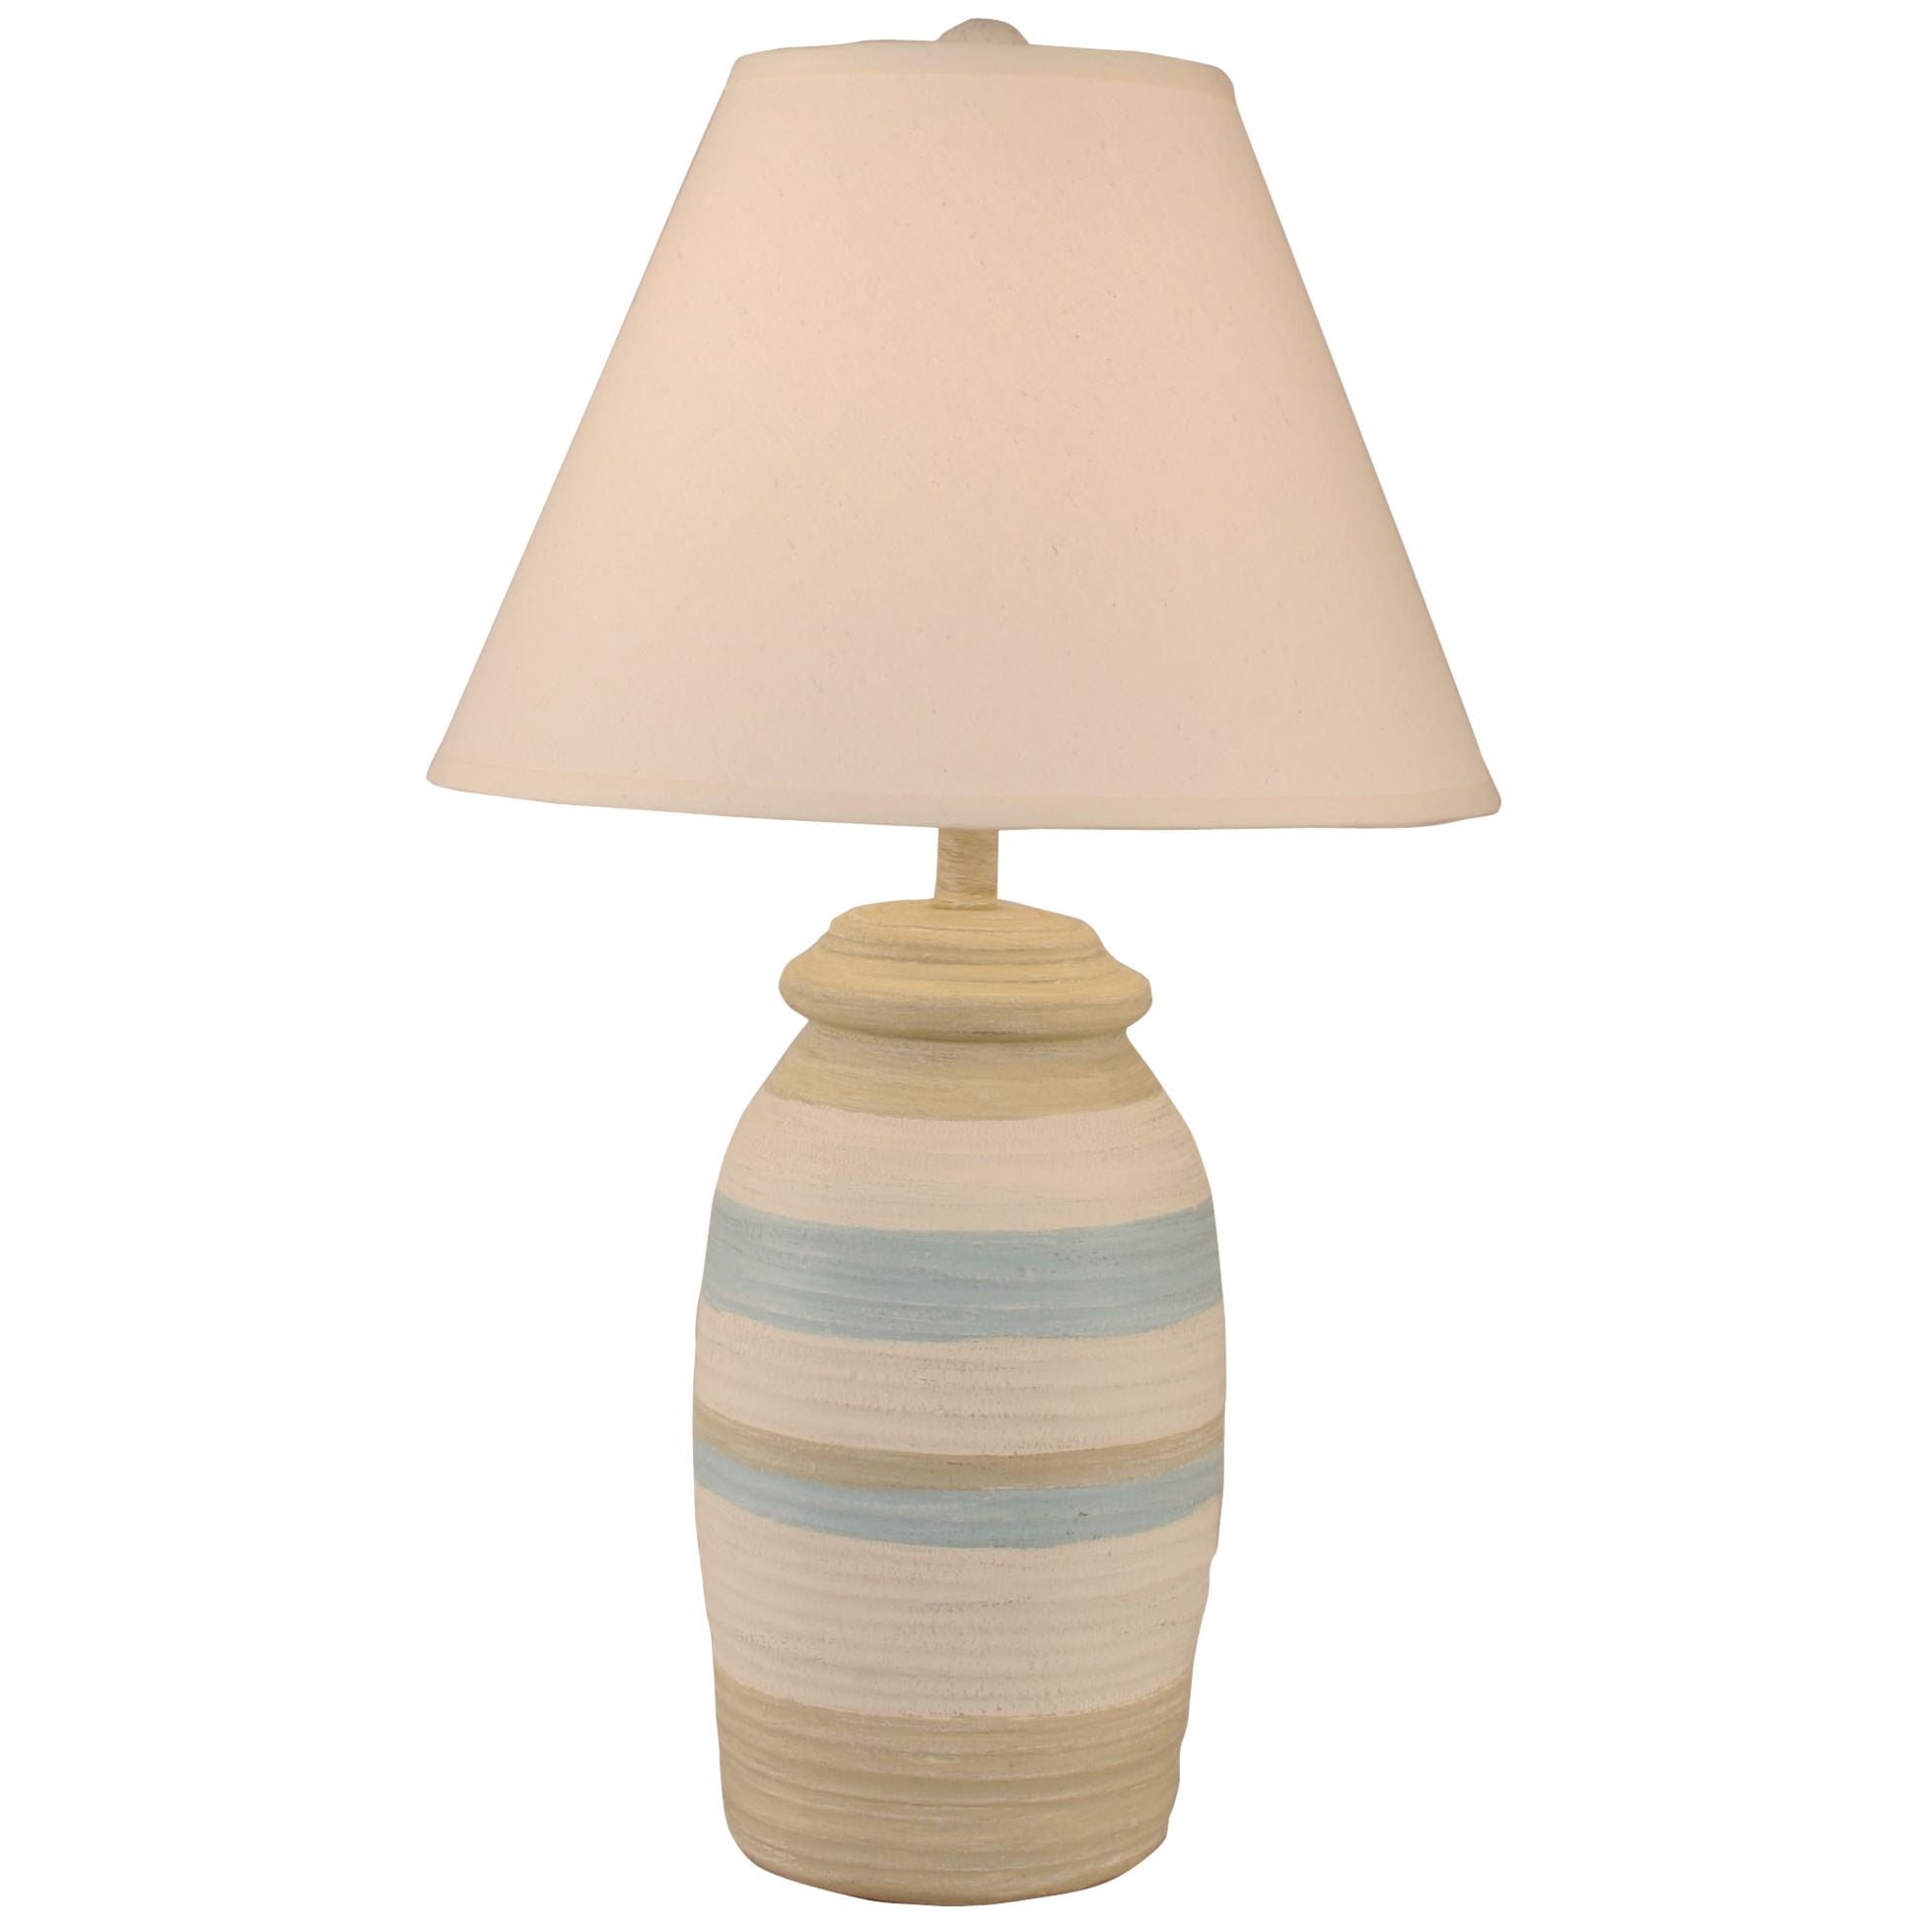 Small Ginger Jar Table Lamp